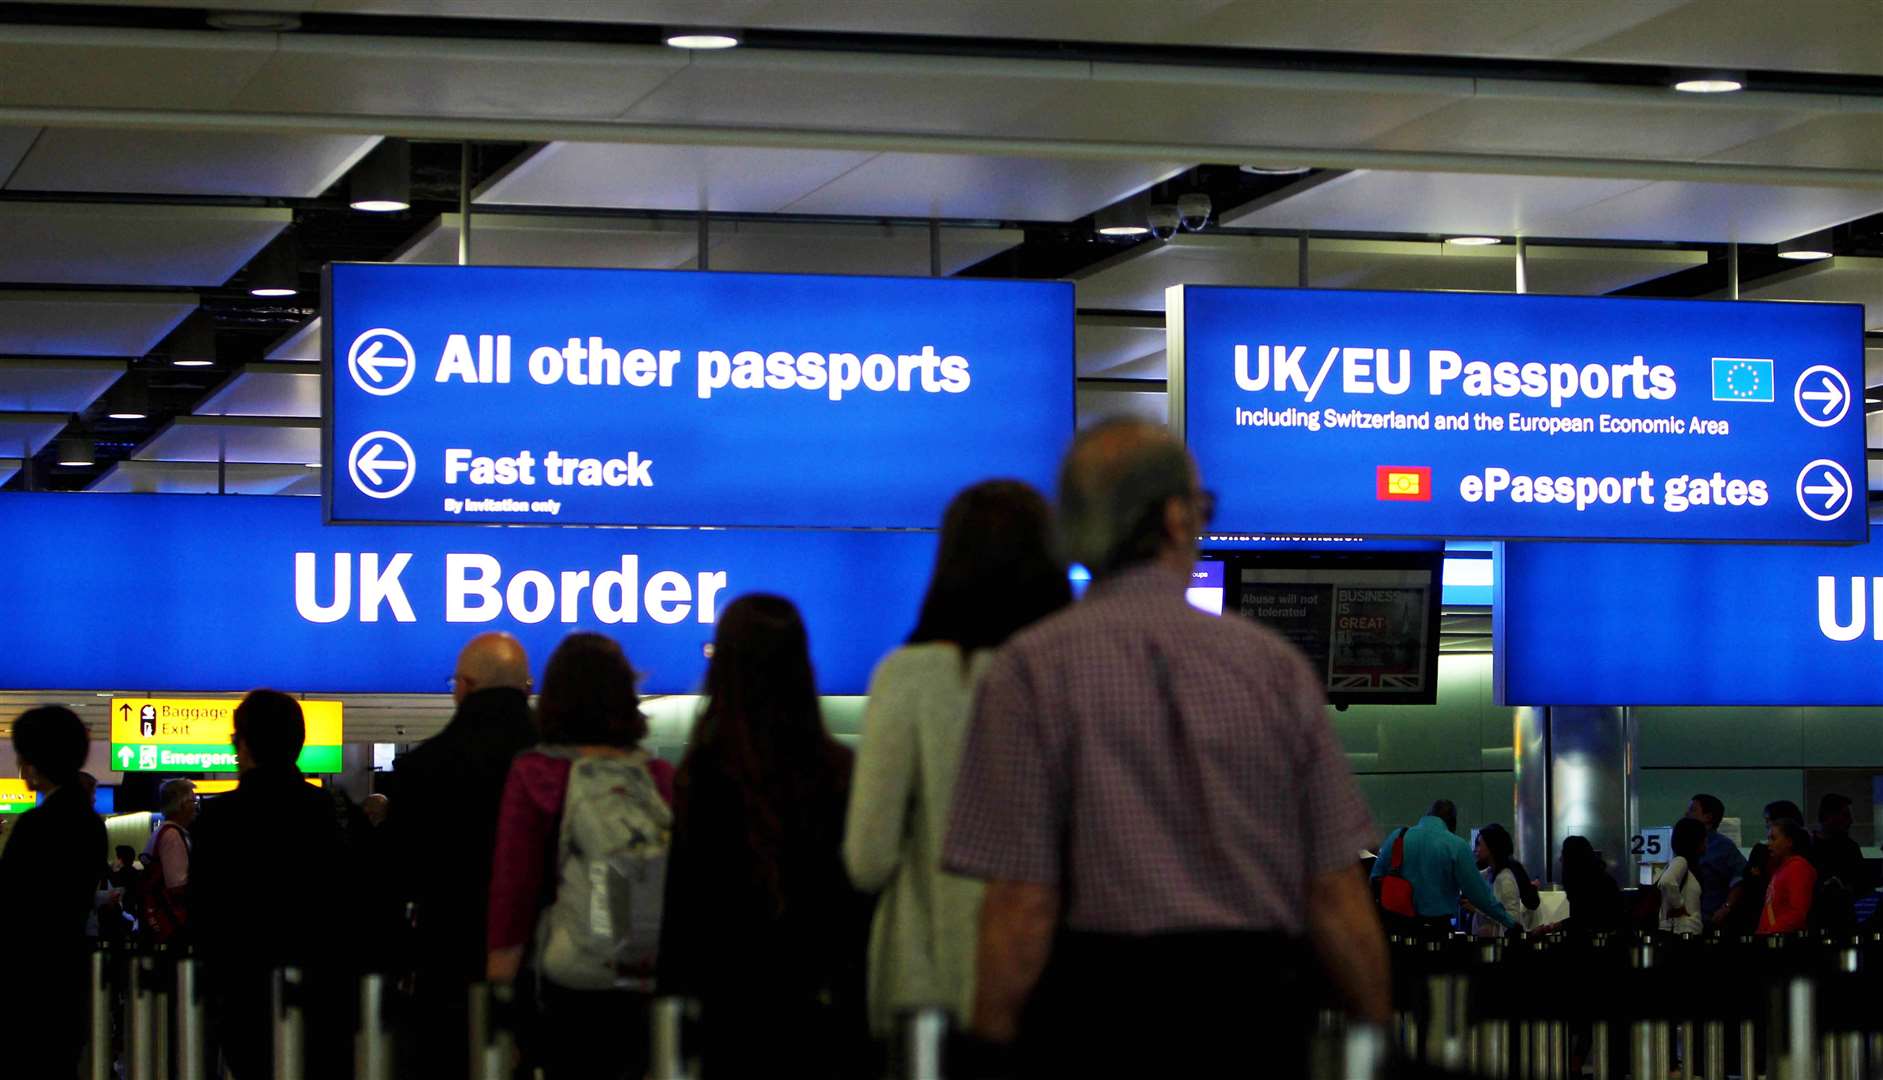 Priti Patel says the immigration system is being overhauled after decades. Archive image